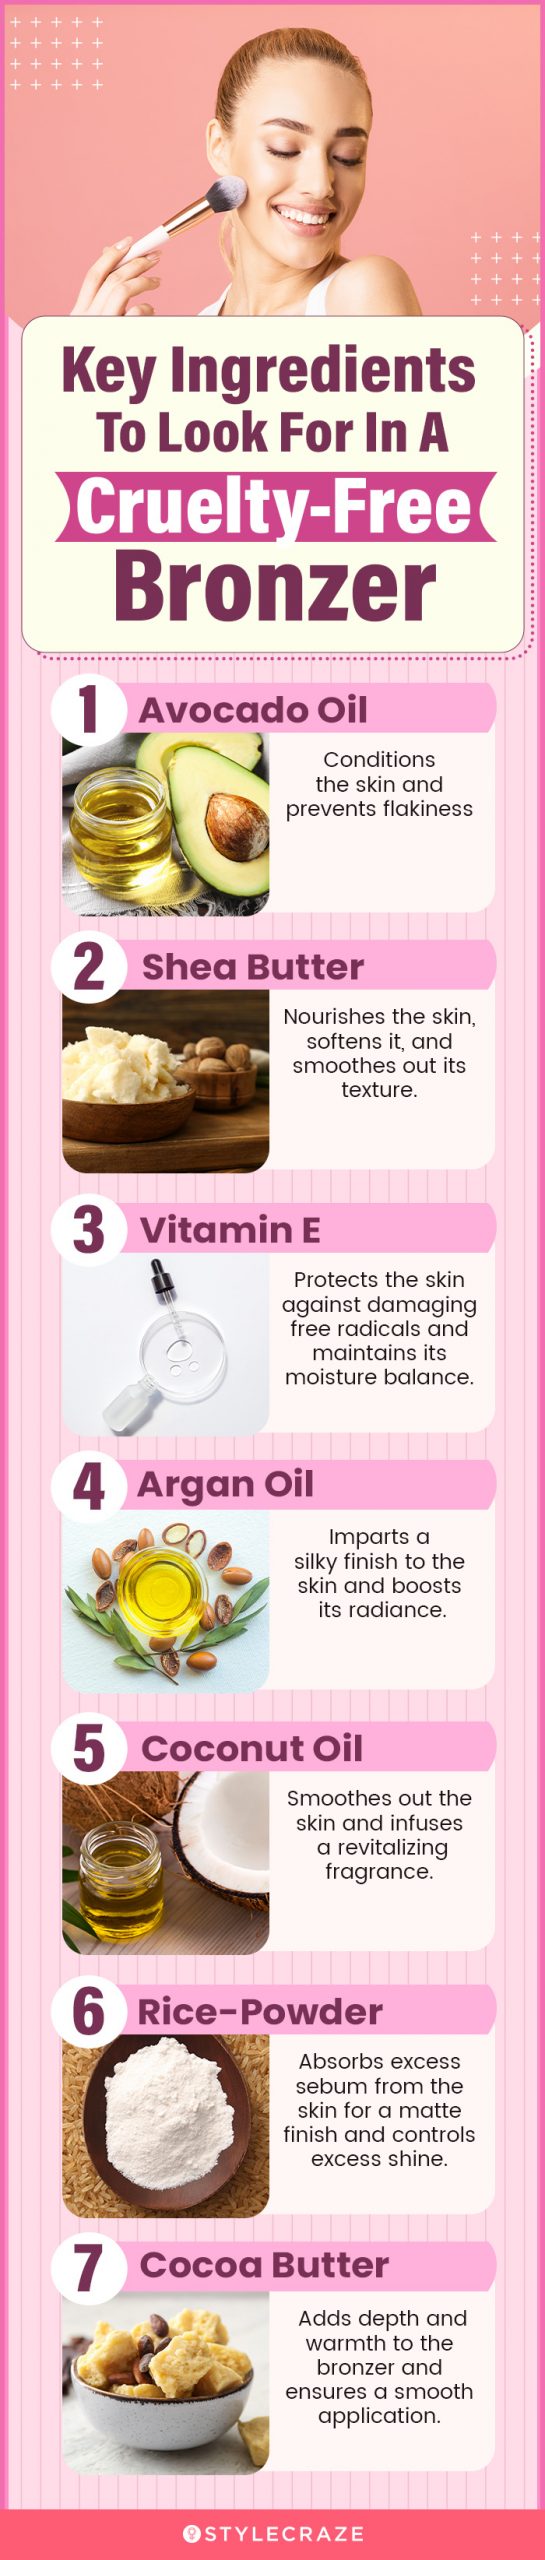 Key Ingredients To Look For In A Cruelty-Free Bronzer (infographic)